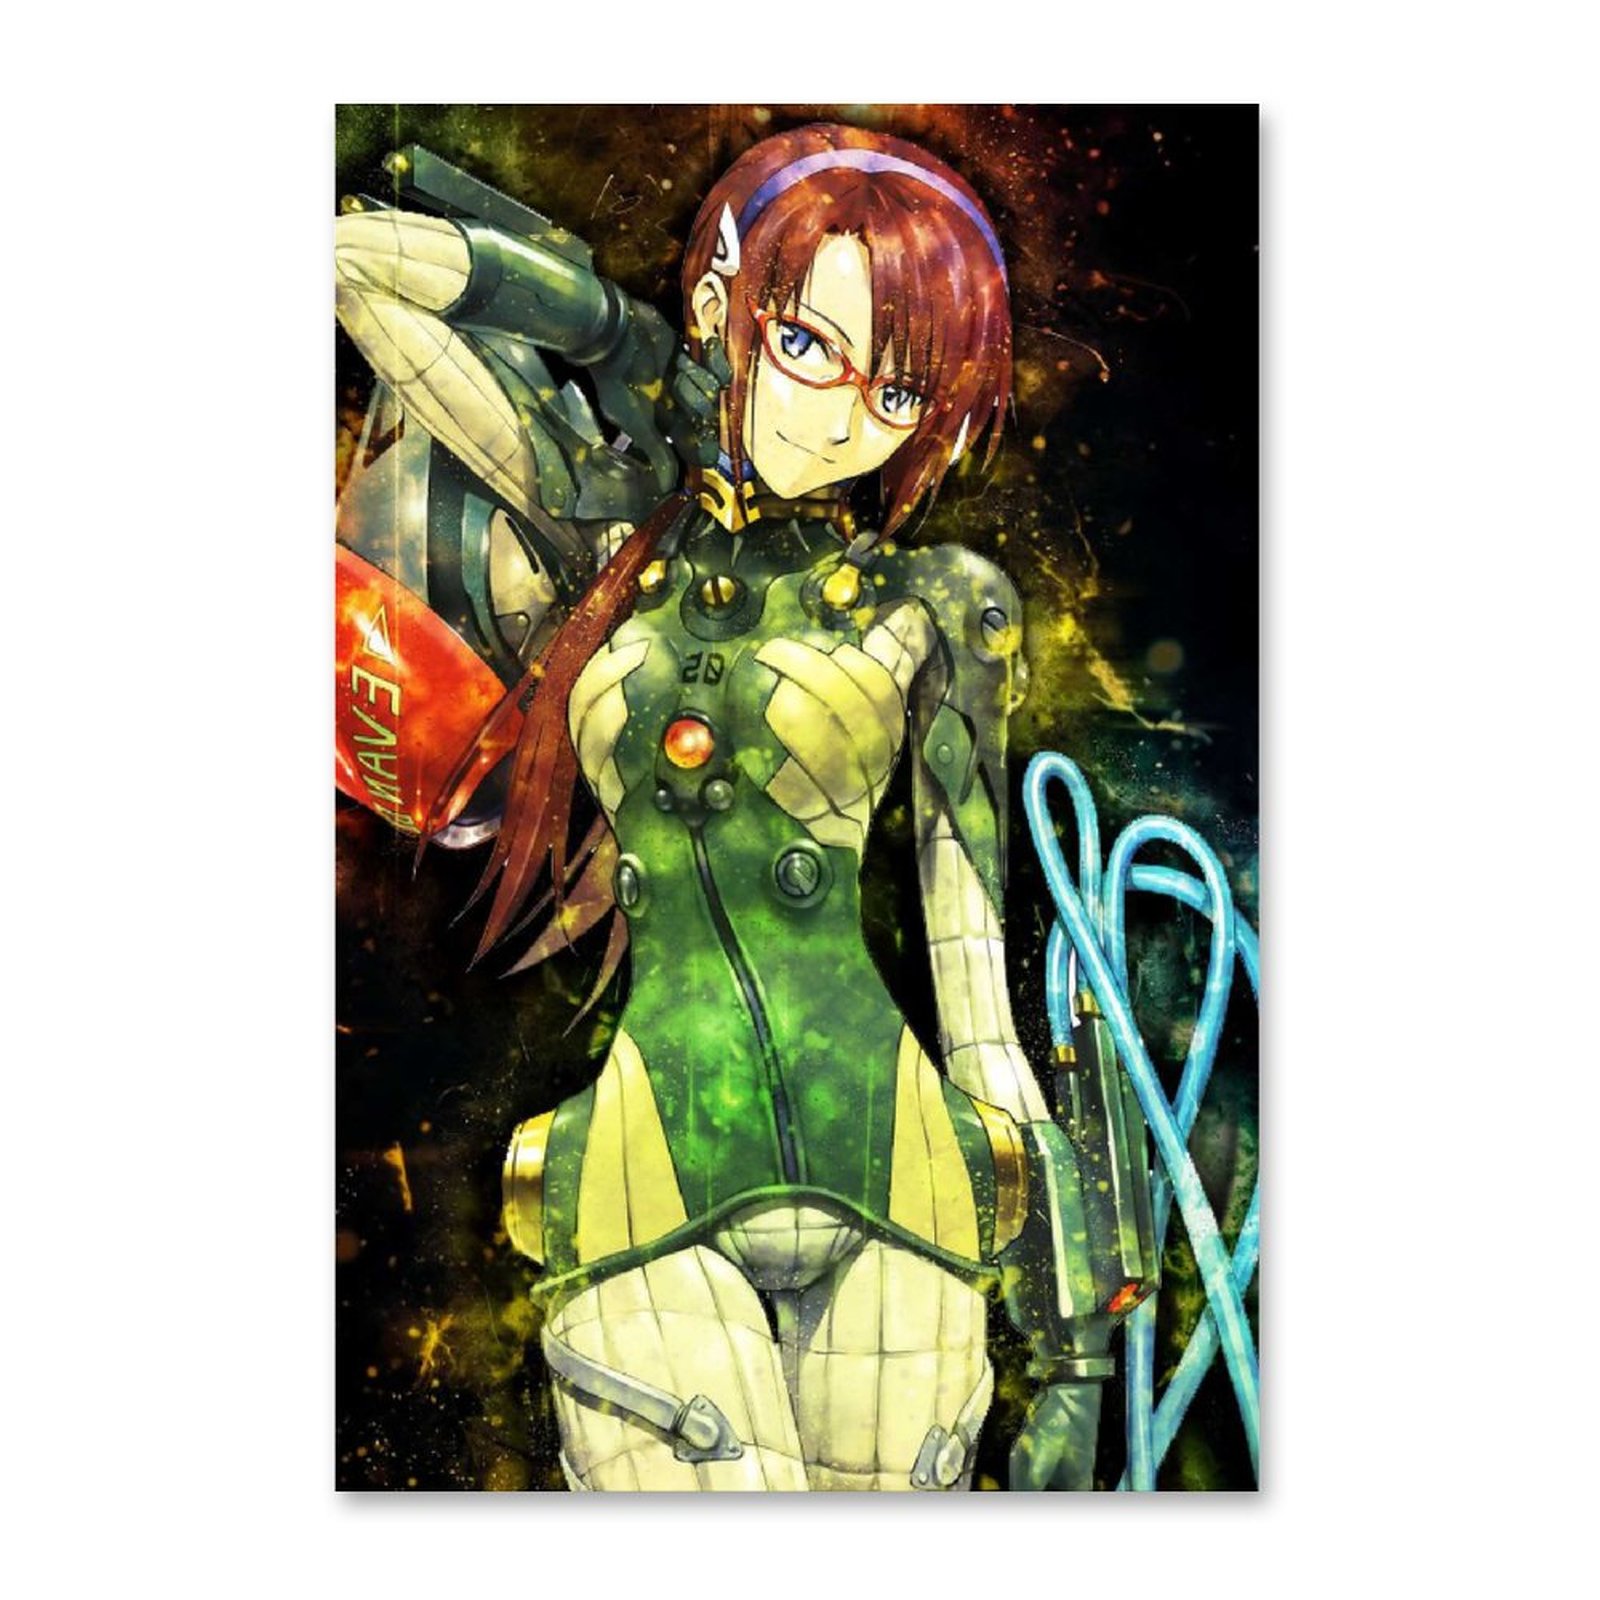 Anime Evangelion Girl MakinamiCanvas Painting Wall Art Posters and Prints Wall Pictures for Living Room Decoration - Evangelion Shop